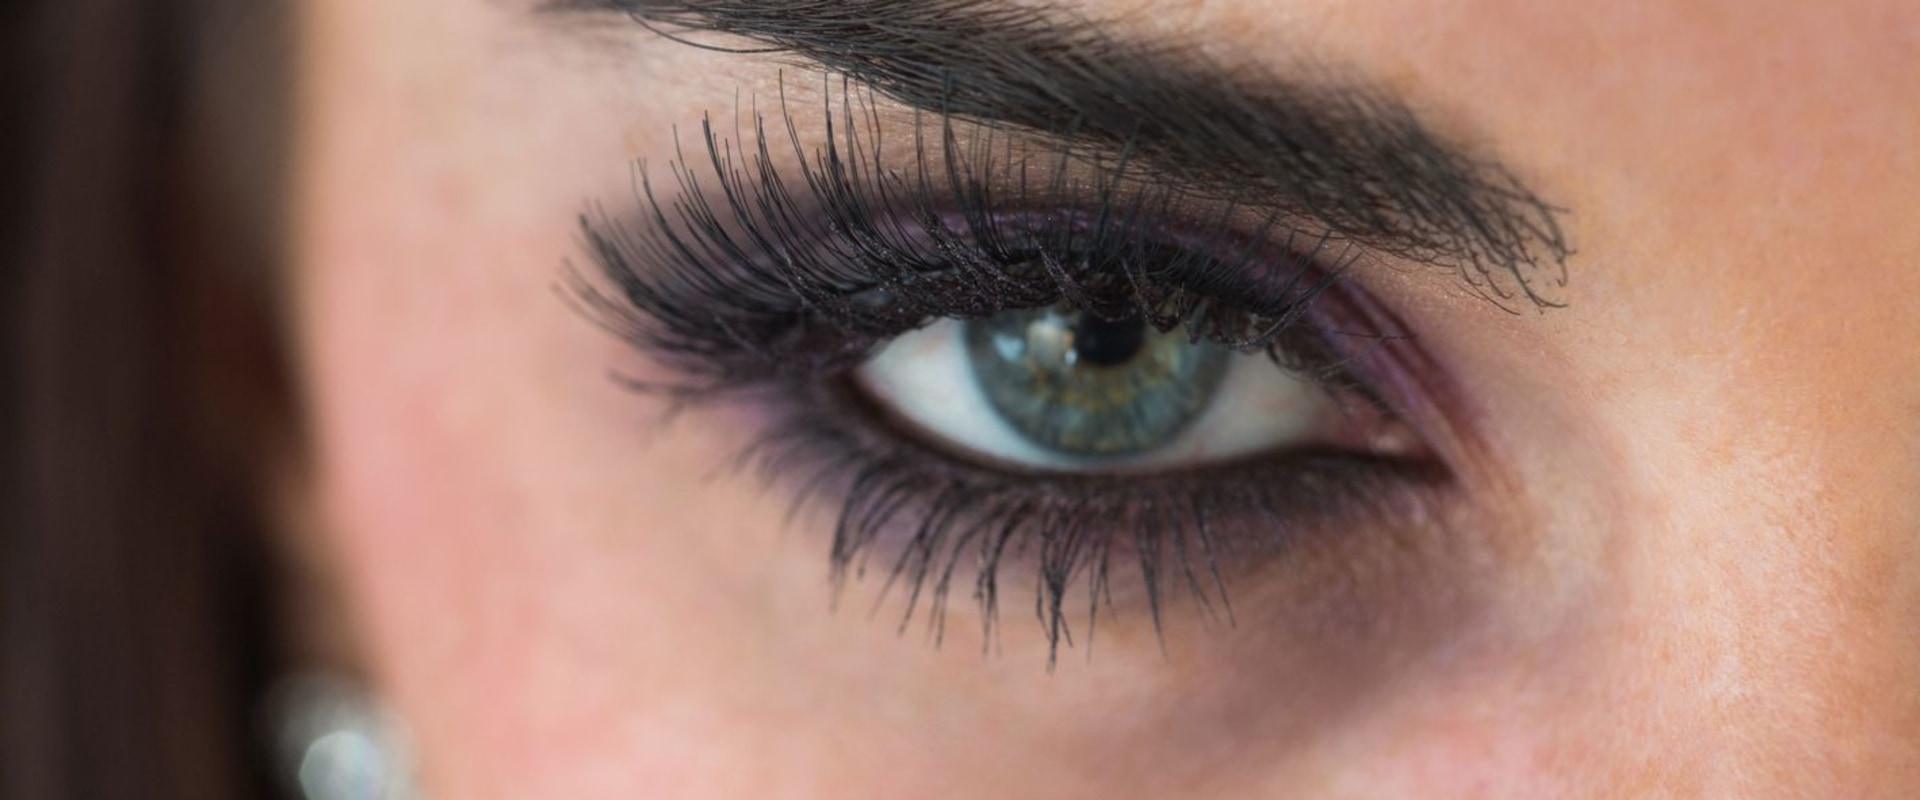 Do lash extensions make you look better?